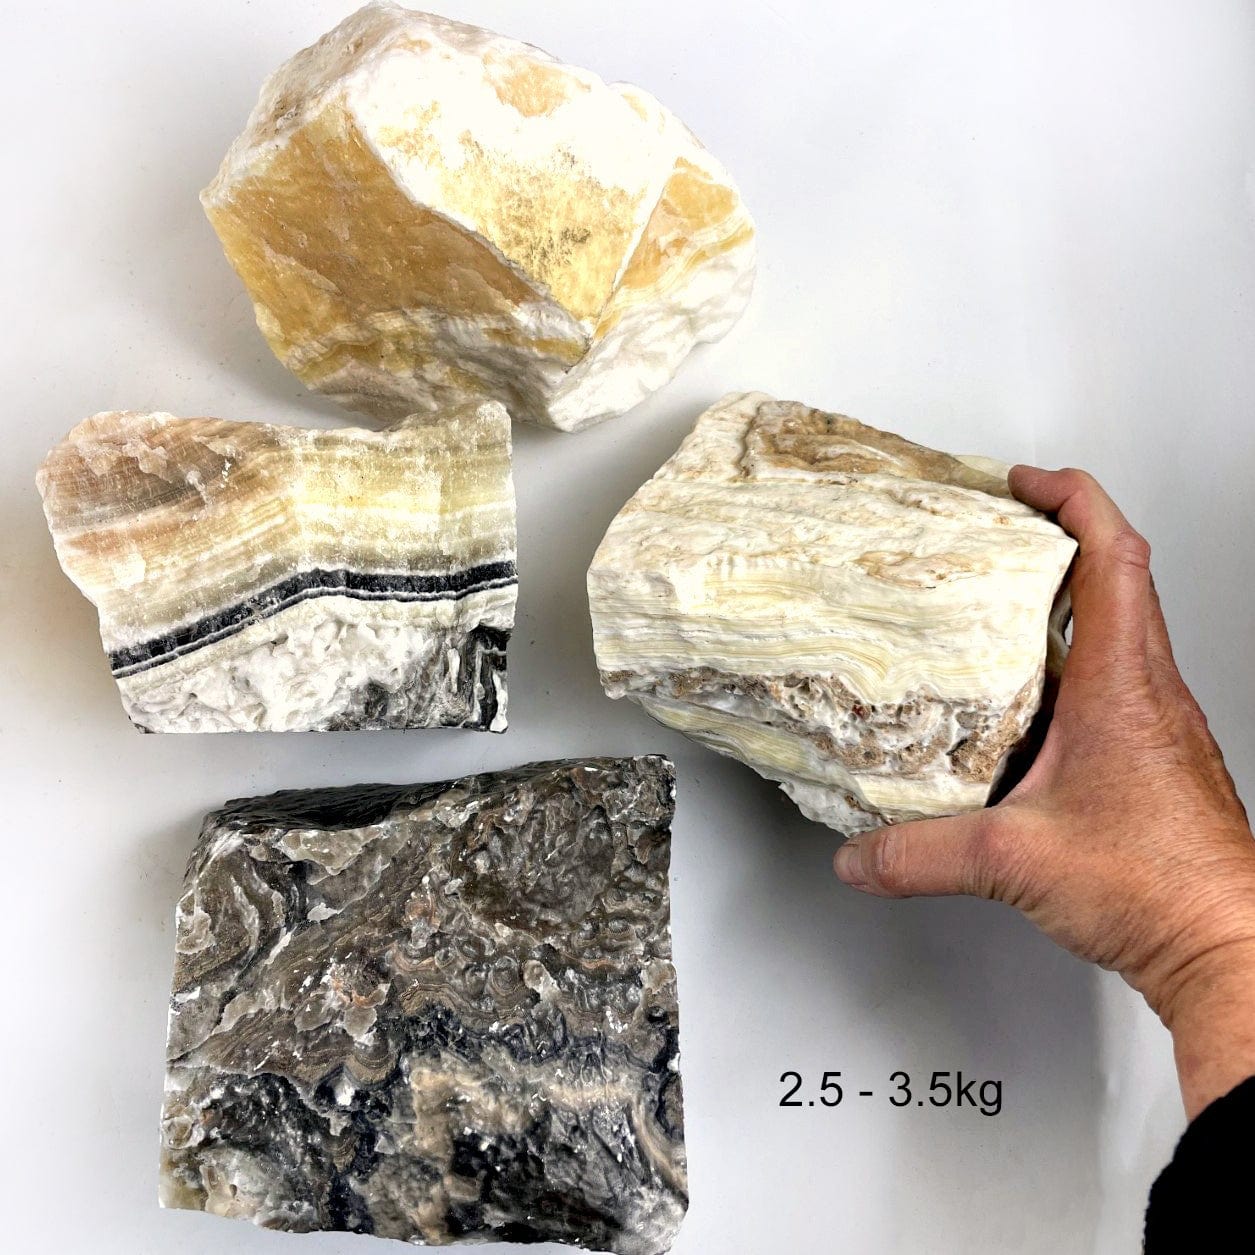 Mexican Onyx Rough Stone Chunks in the size 2.5-3.5 kilos, with one in a hand for size reference